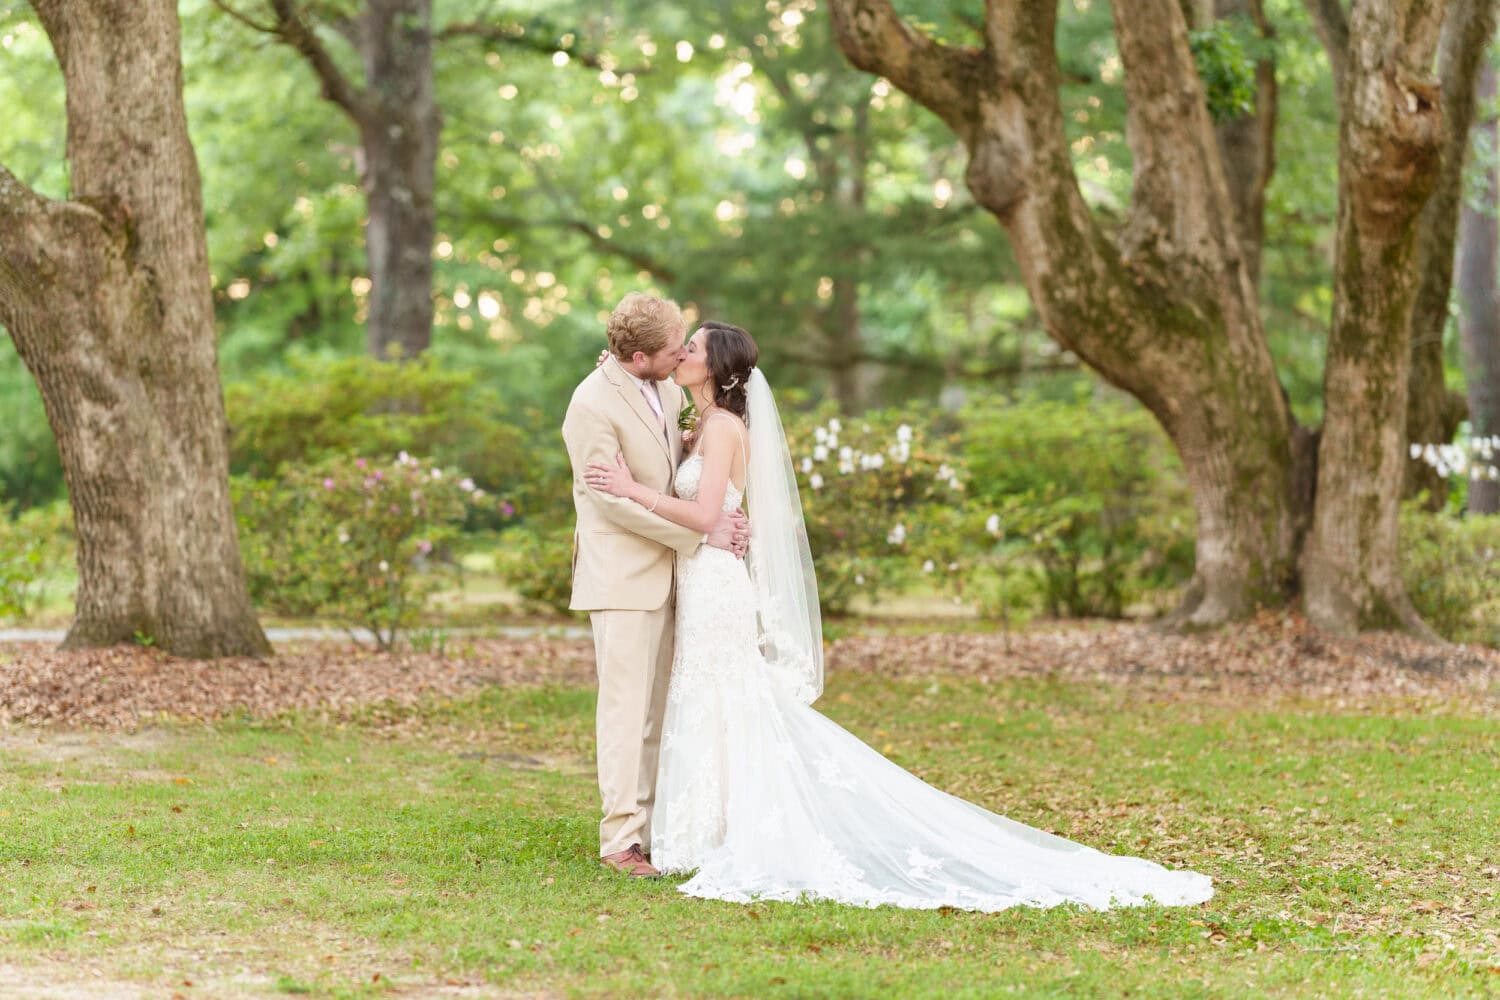 Kiss under the trees - Tanglewood Plantation